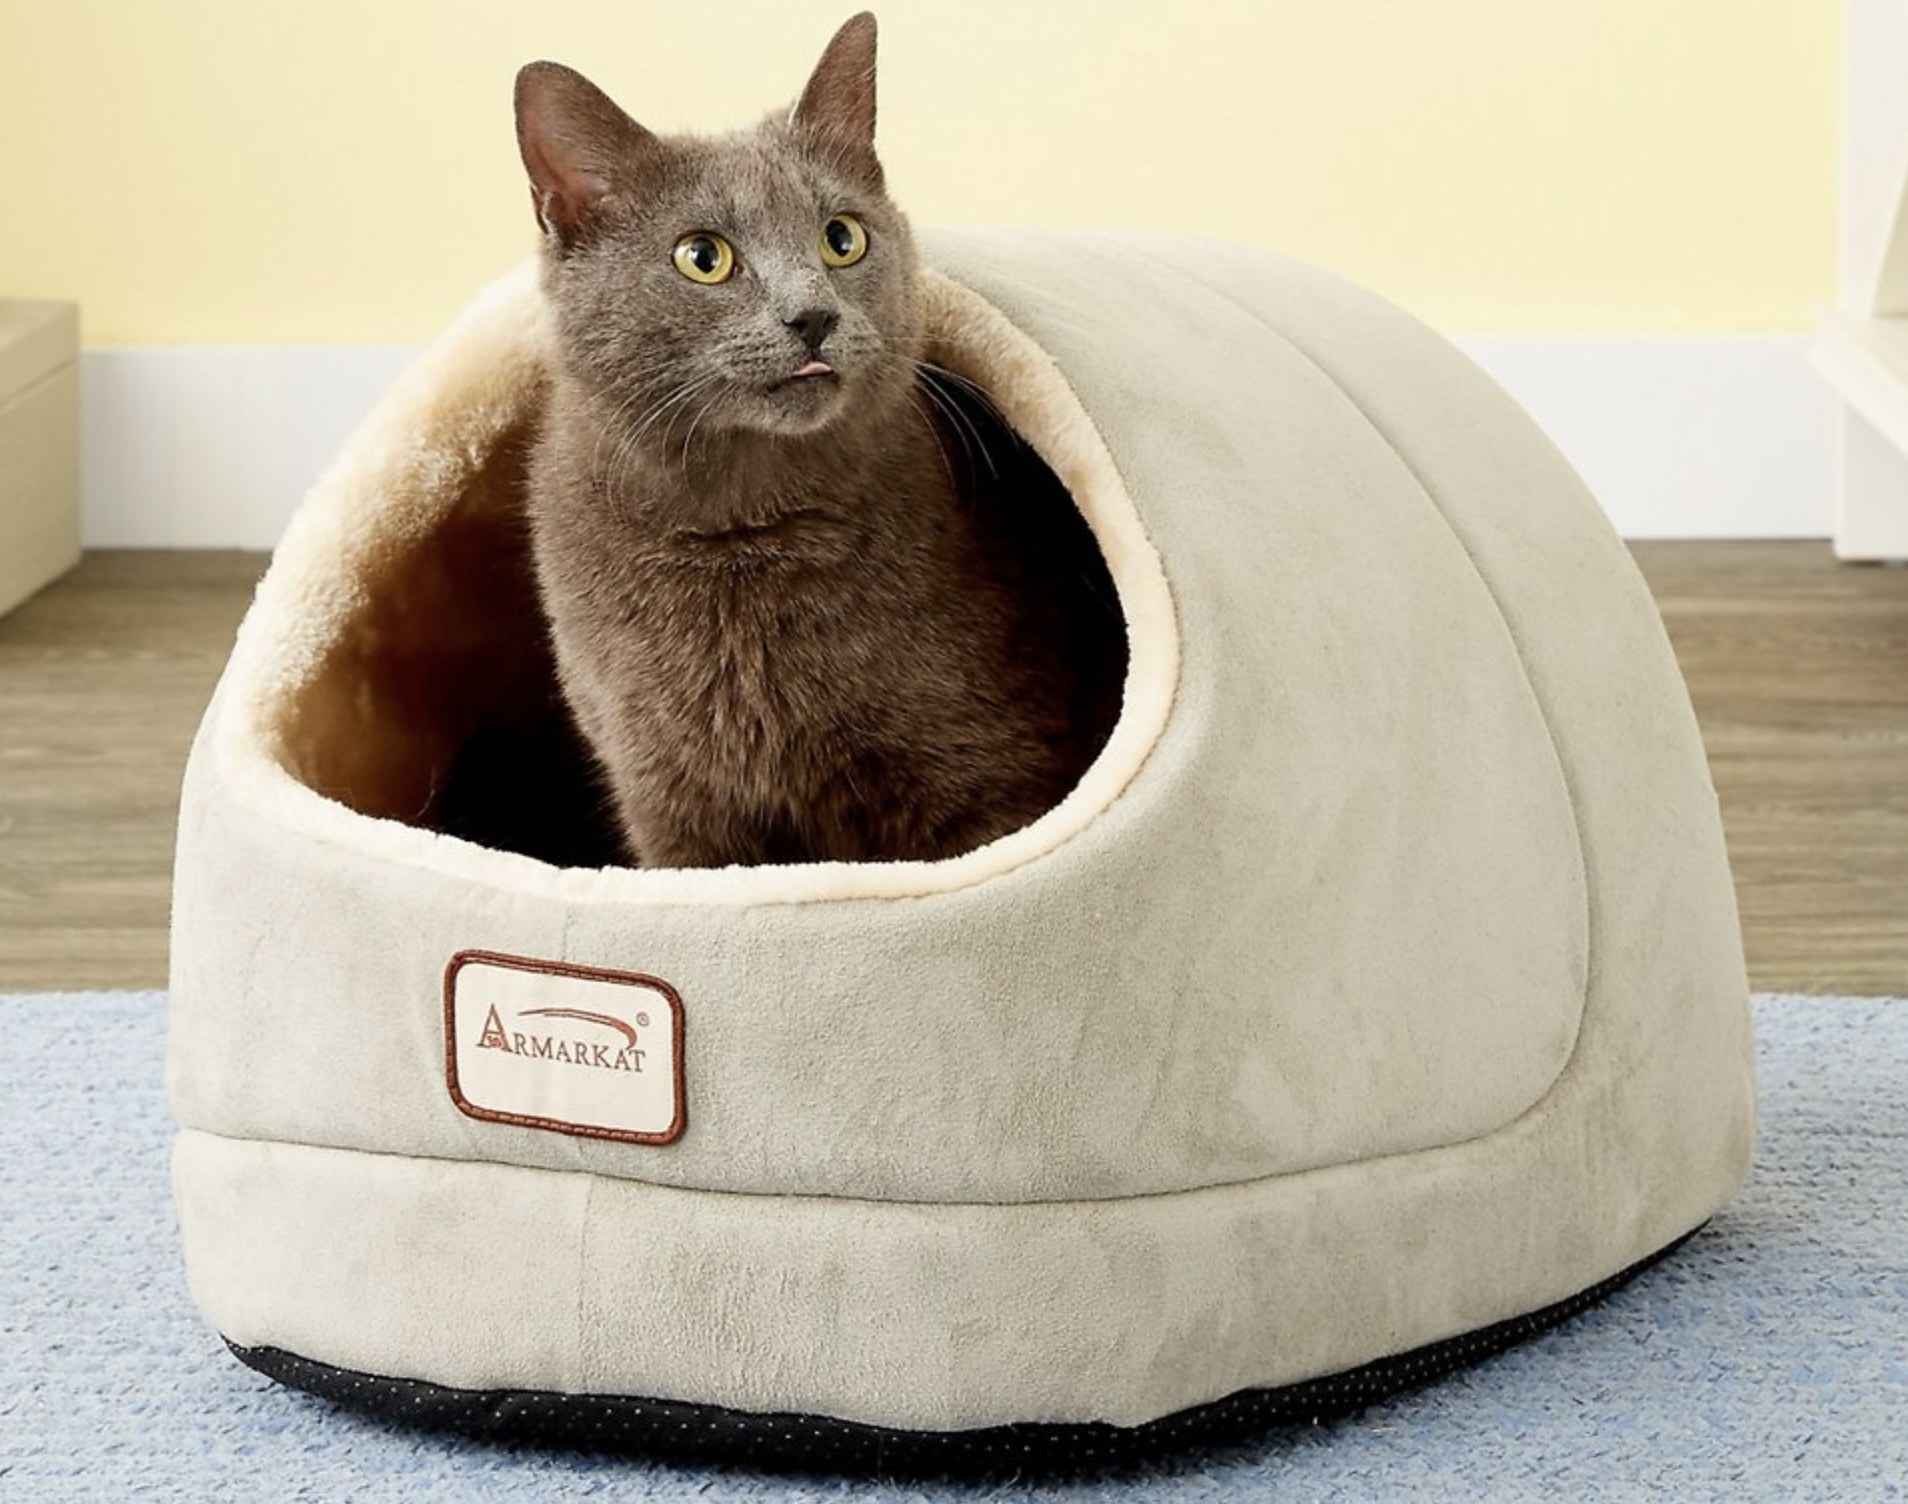 A grey cat sitting inside a beige cave bed